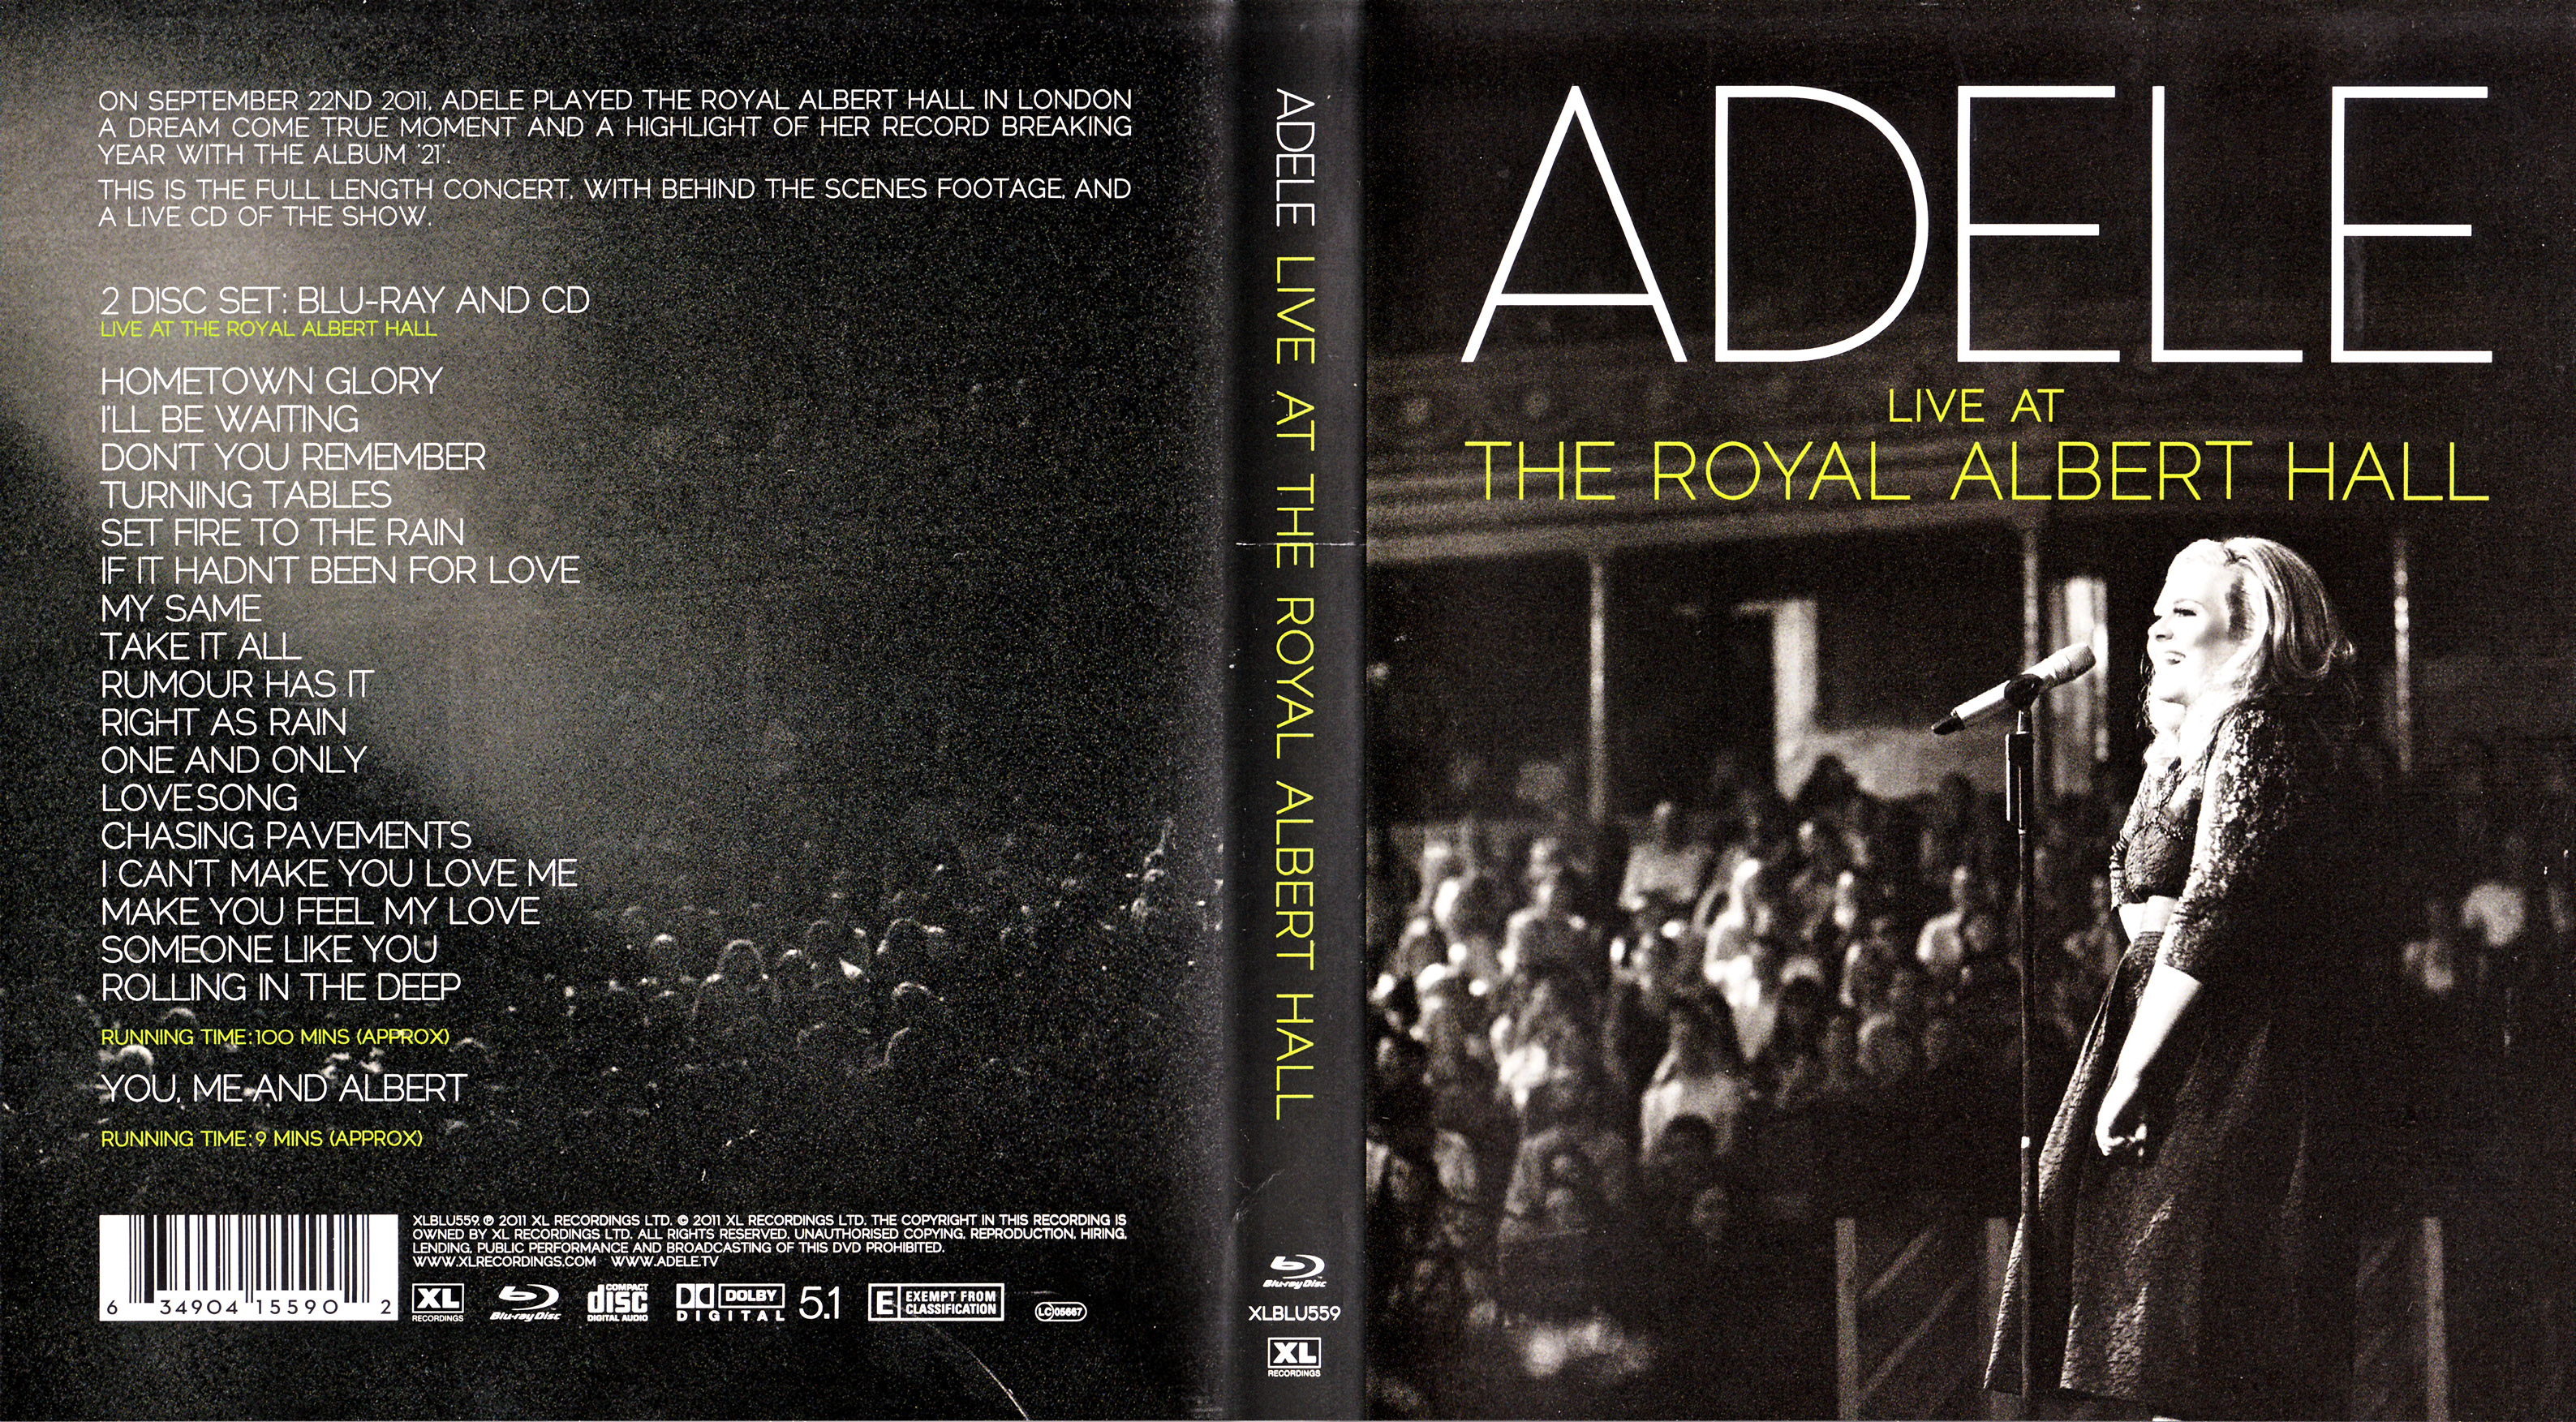 Jaquette DVD Adle Live at the royal Albert Hall (BLU-RAY)